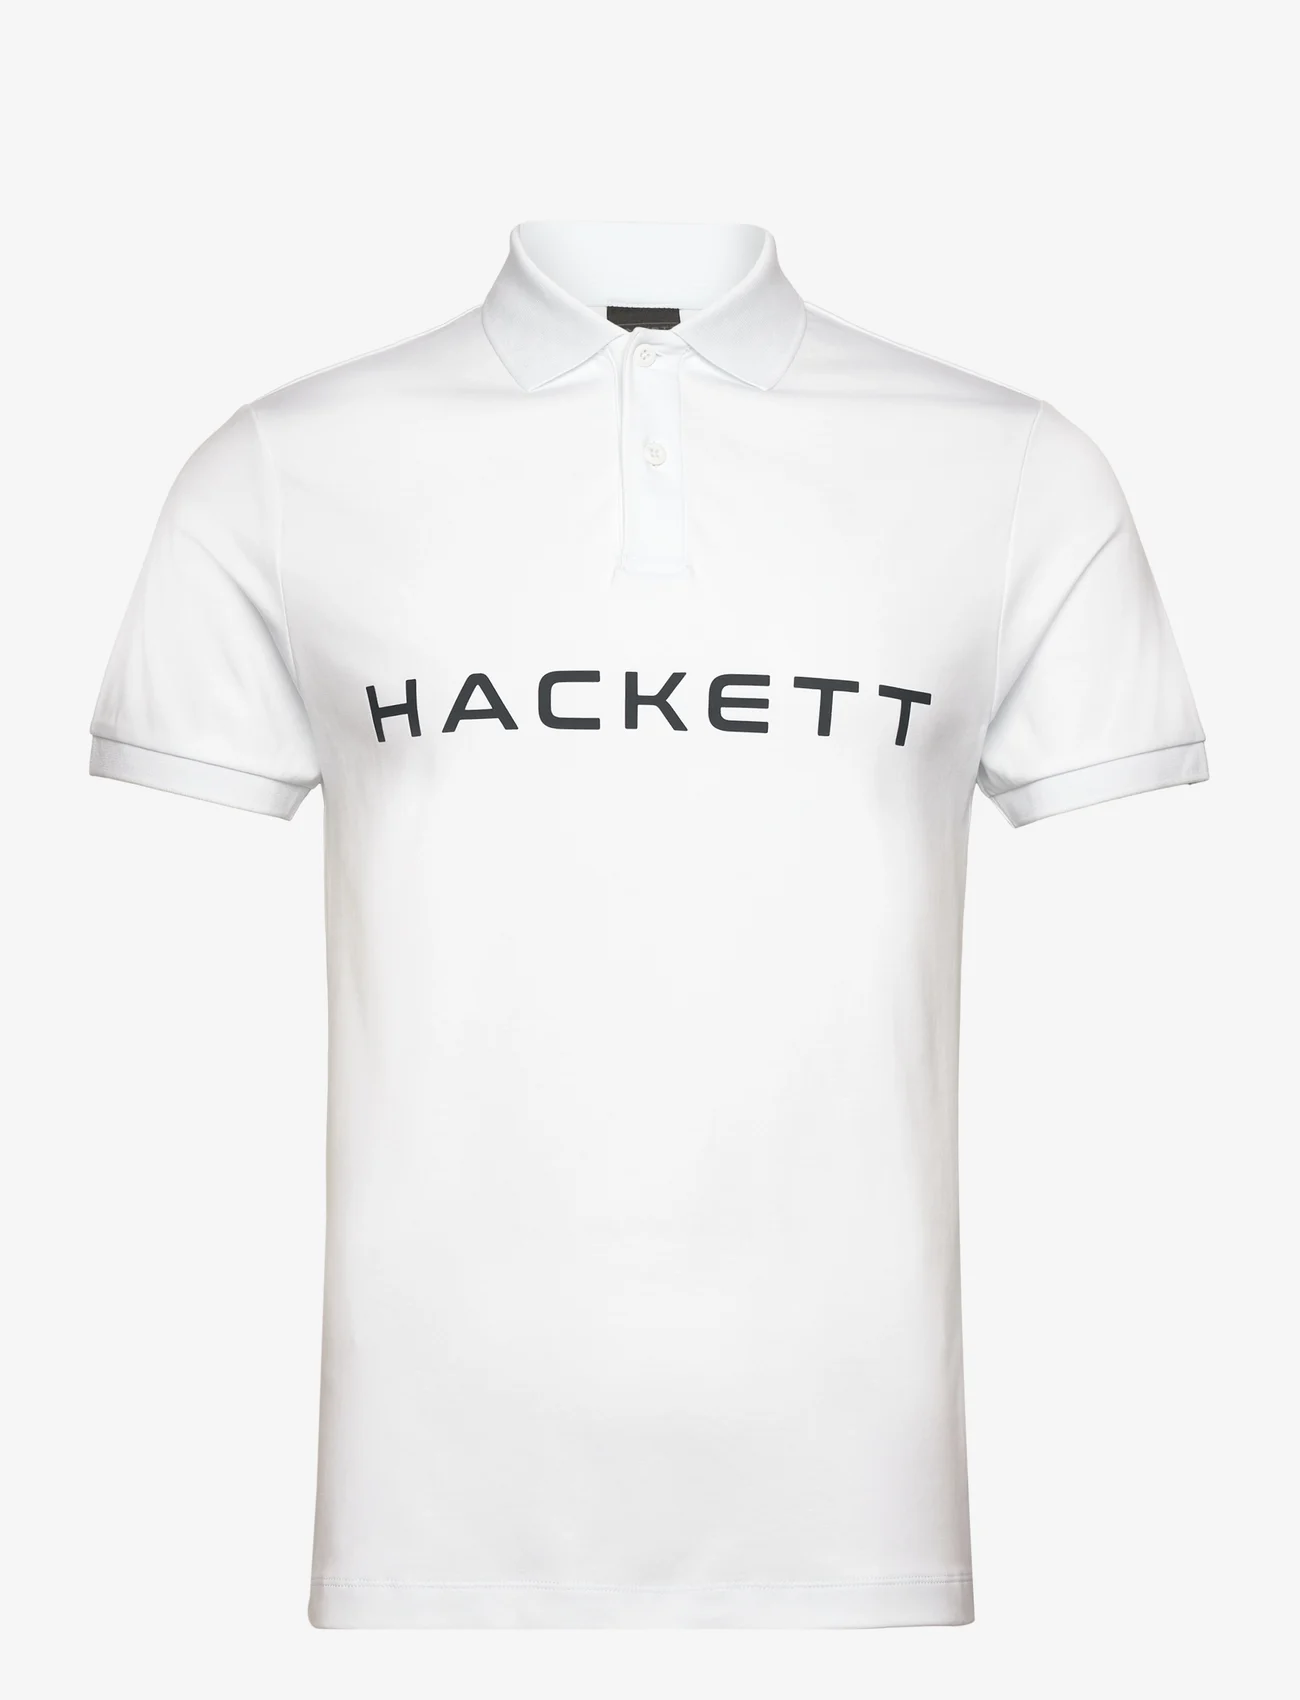 Hackett London - ESSENTIAL POLO - short-sleeved polos - white/navy - 0